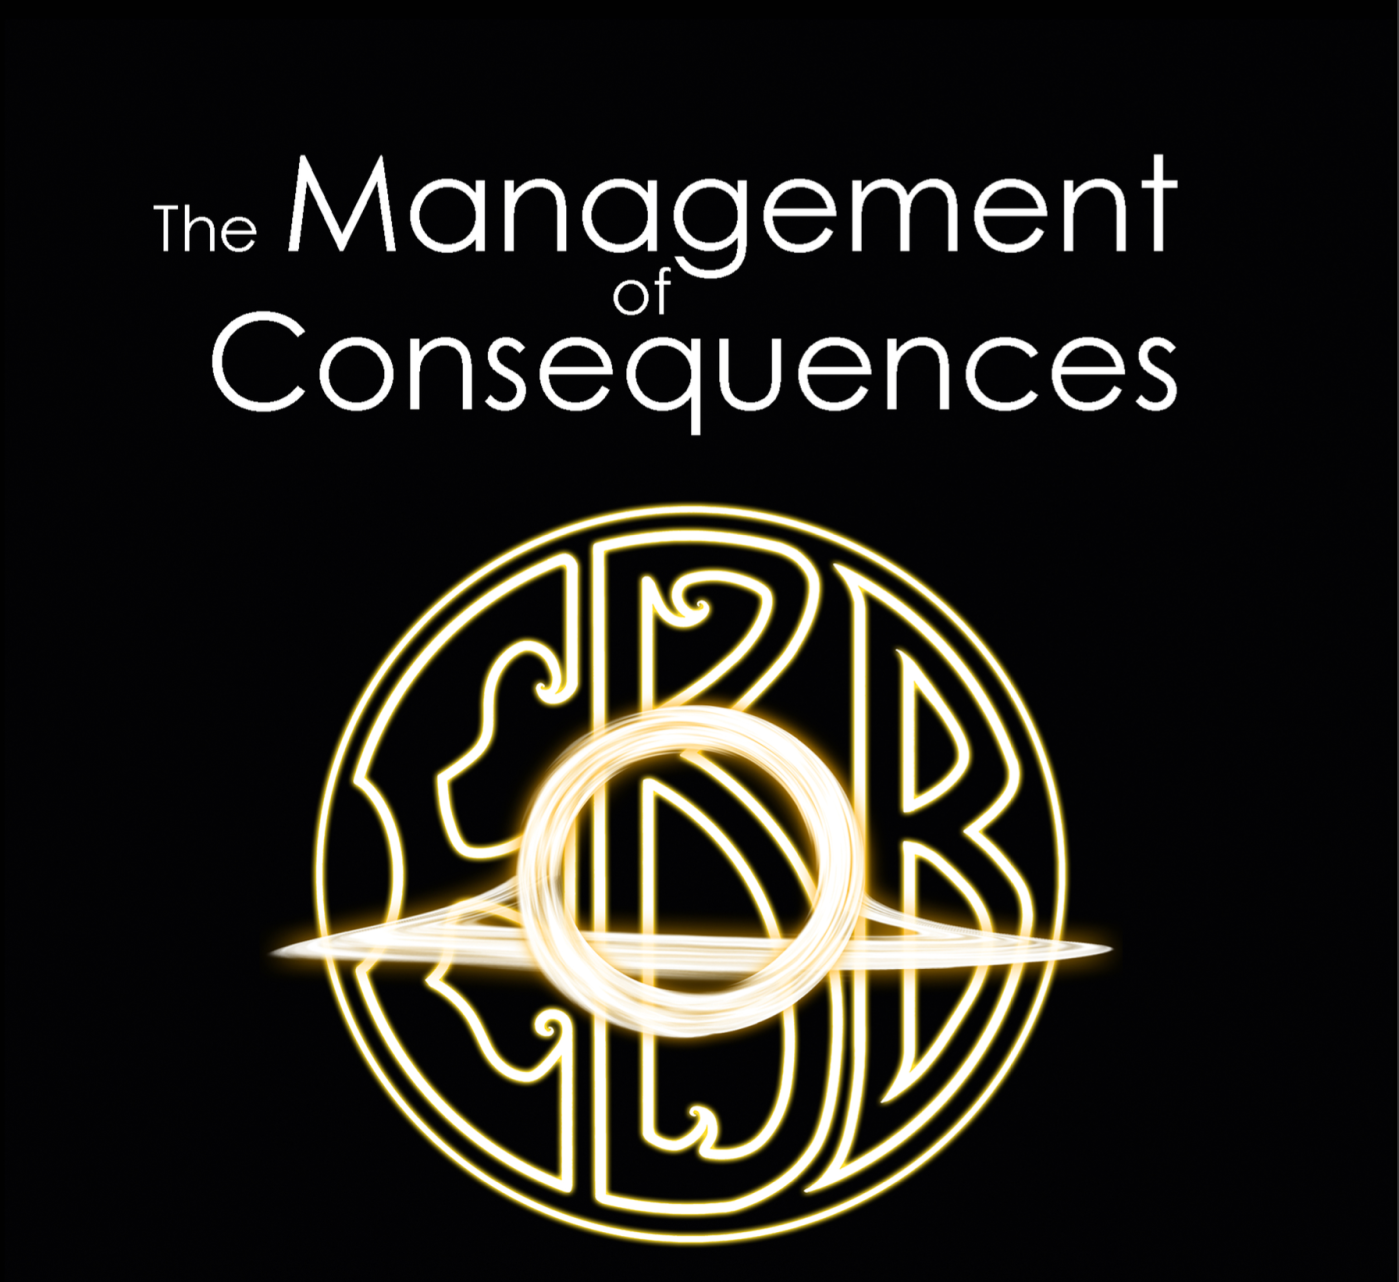 The Management of Consequences